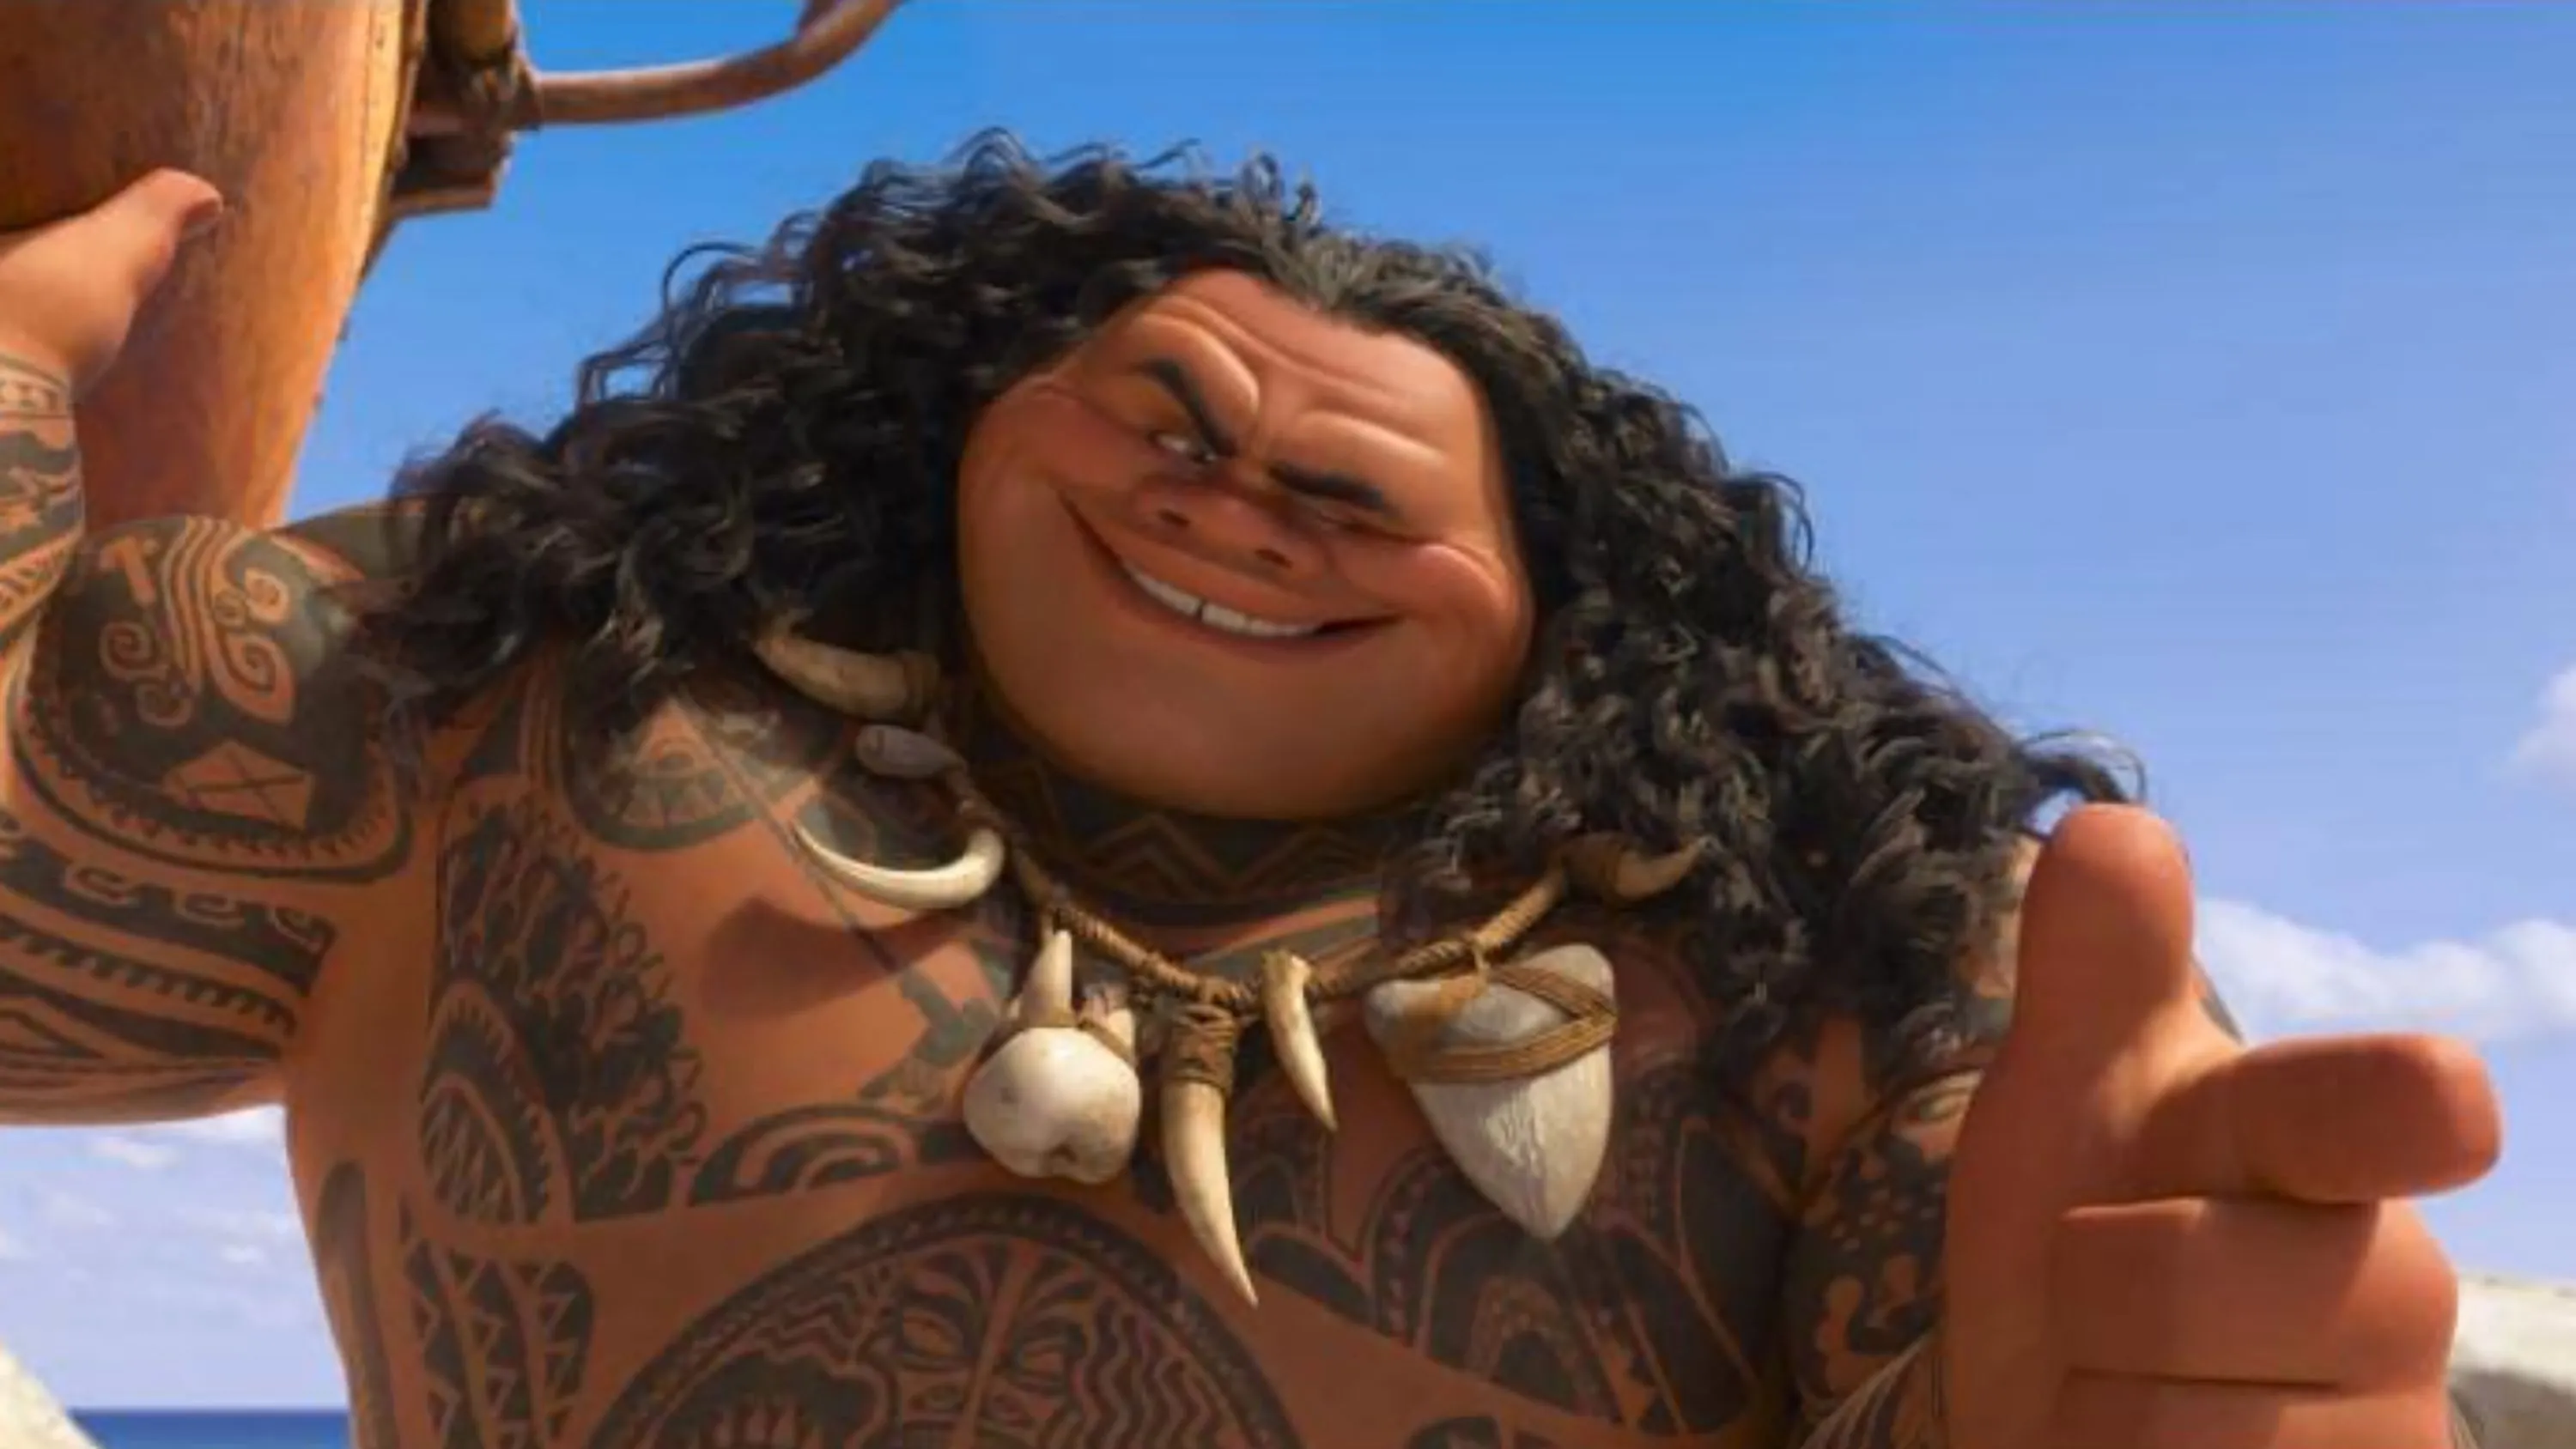 Dwayne Johnson announces live-action 'Moana' is in the works | CNN